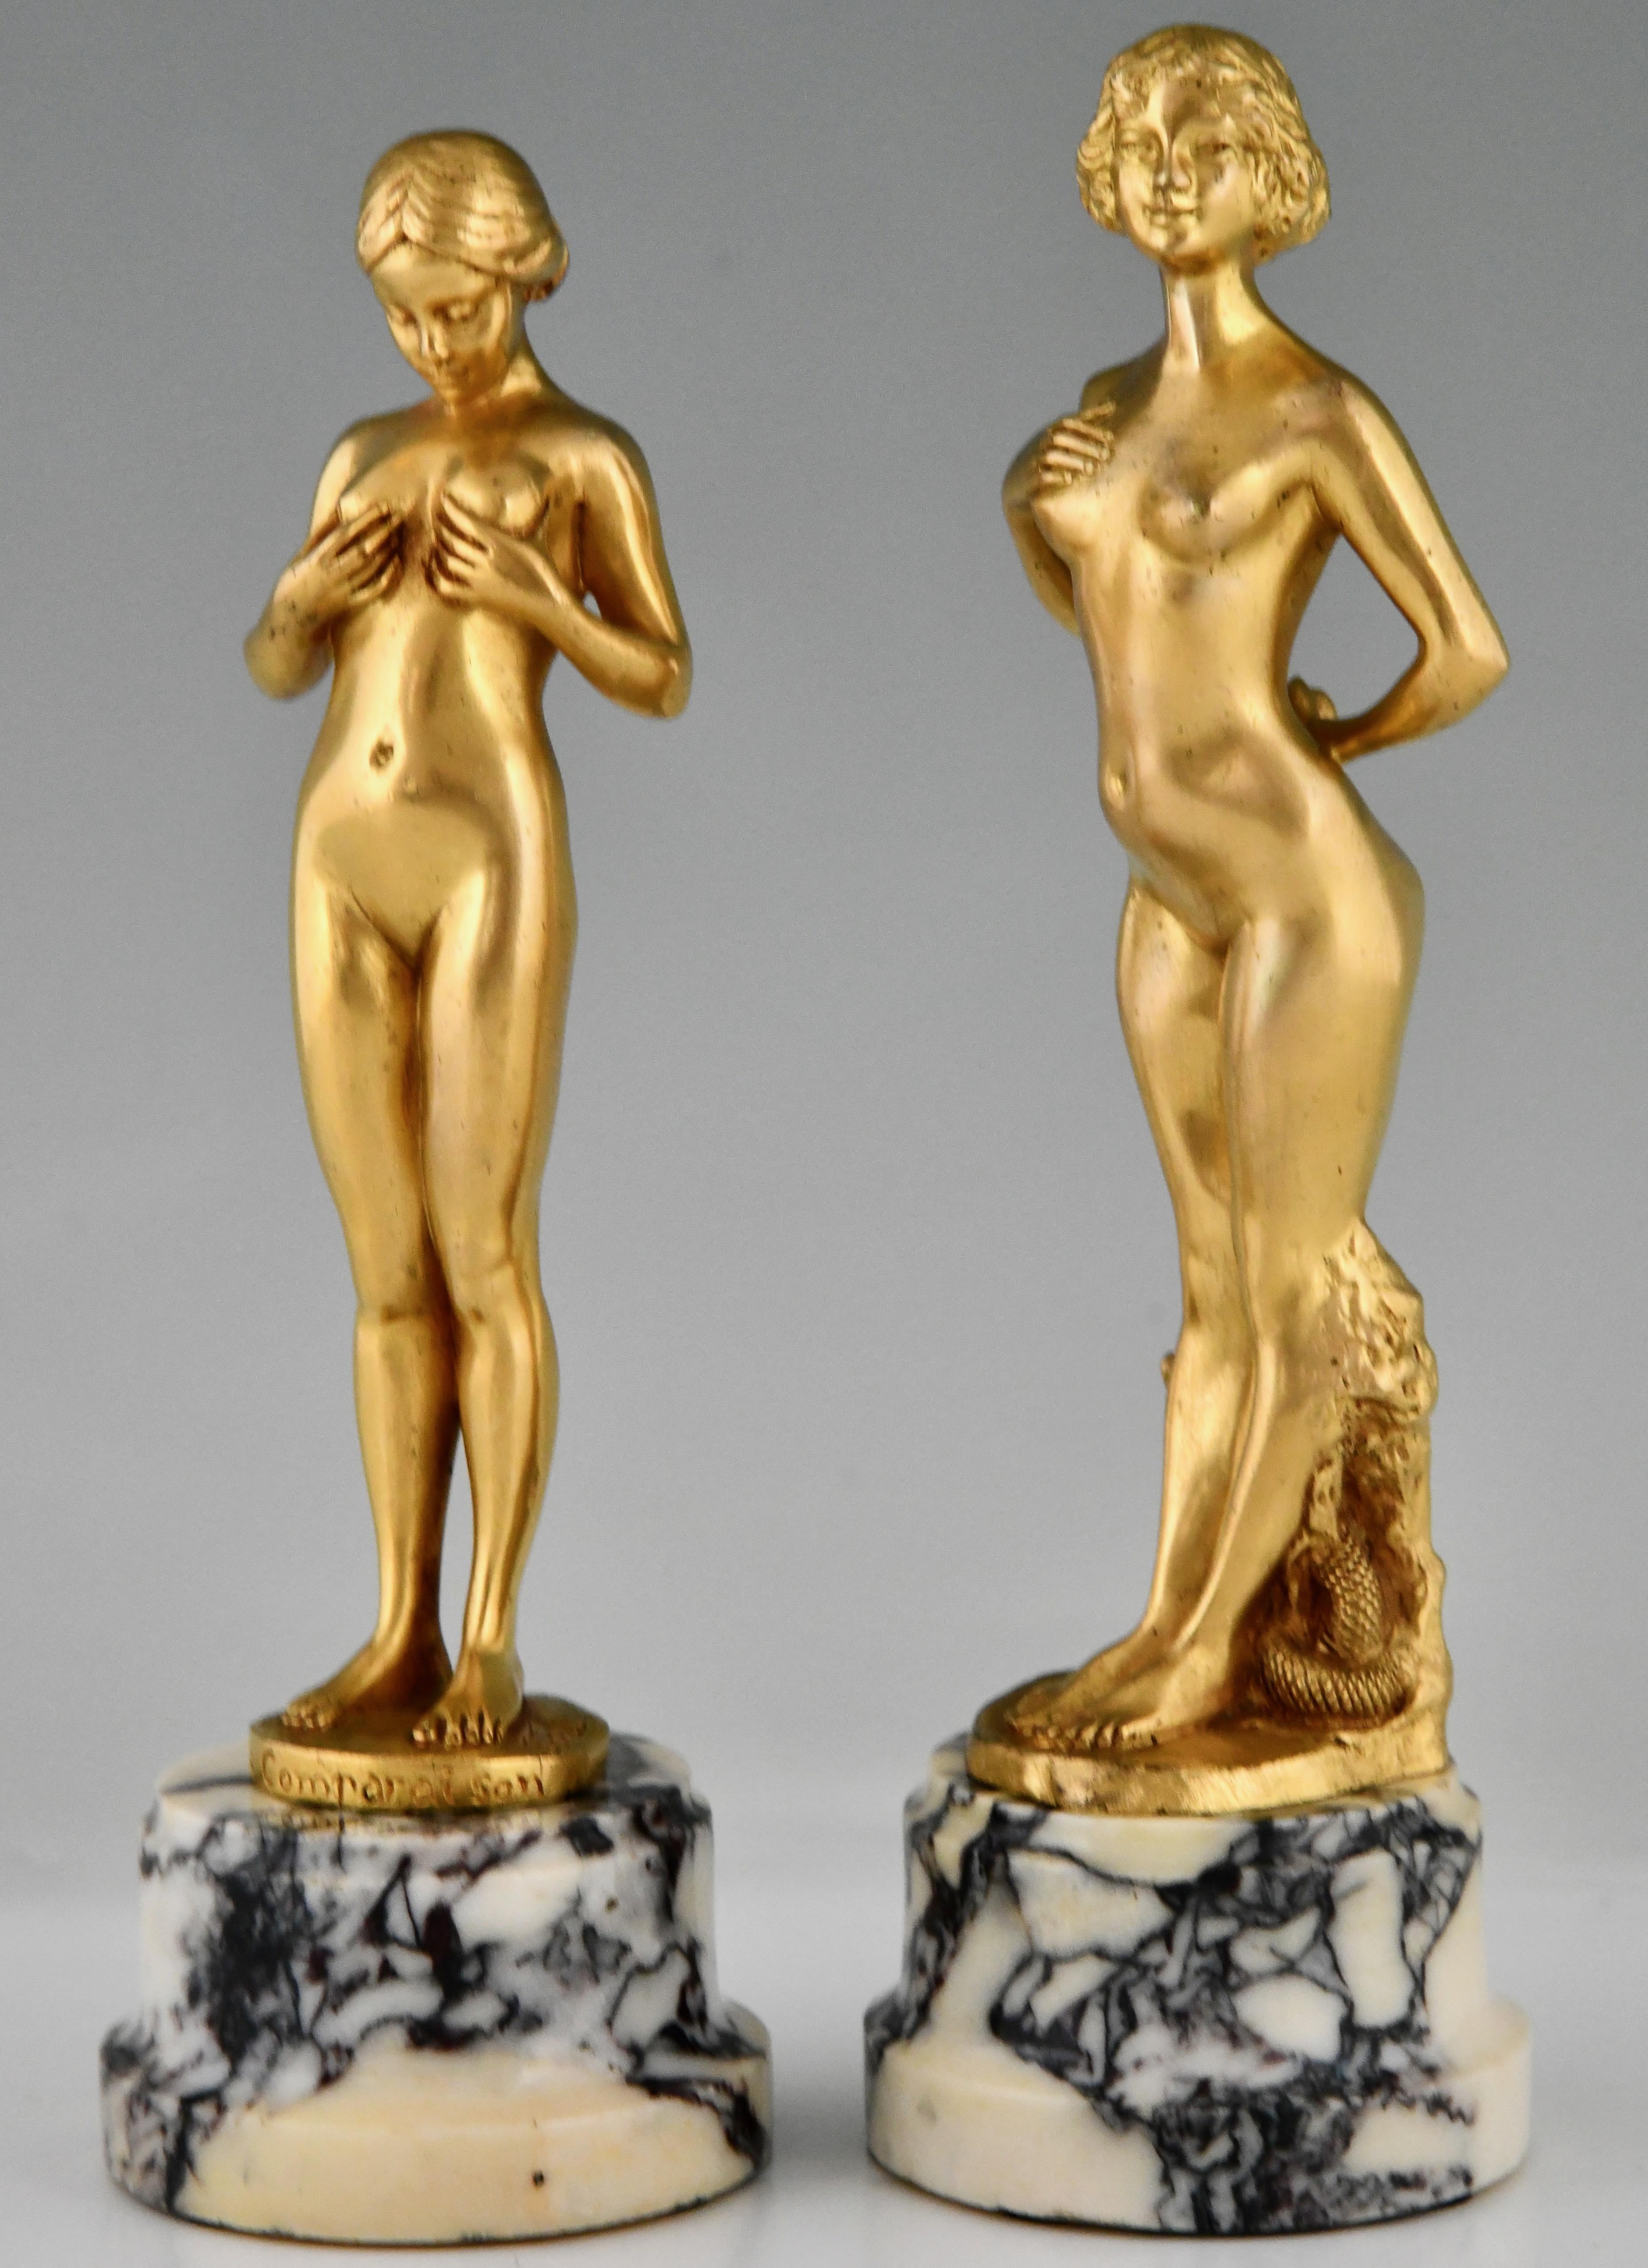 Pair of Art Nouveau bronze nude sculptures signed by Antoine Bofill, France 1905. 
Gilt bronze on marble base. 
La Comparaison, young woman comparing her breasts and Eve with apple and snake.

Literature:
Bronzes, sculptors and founders, H. Berman,